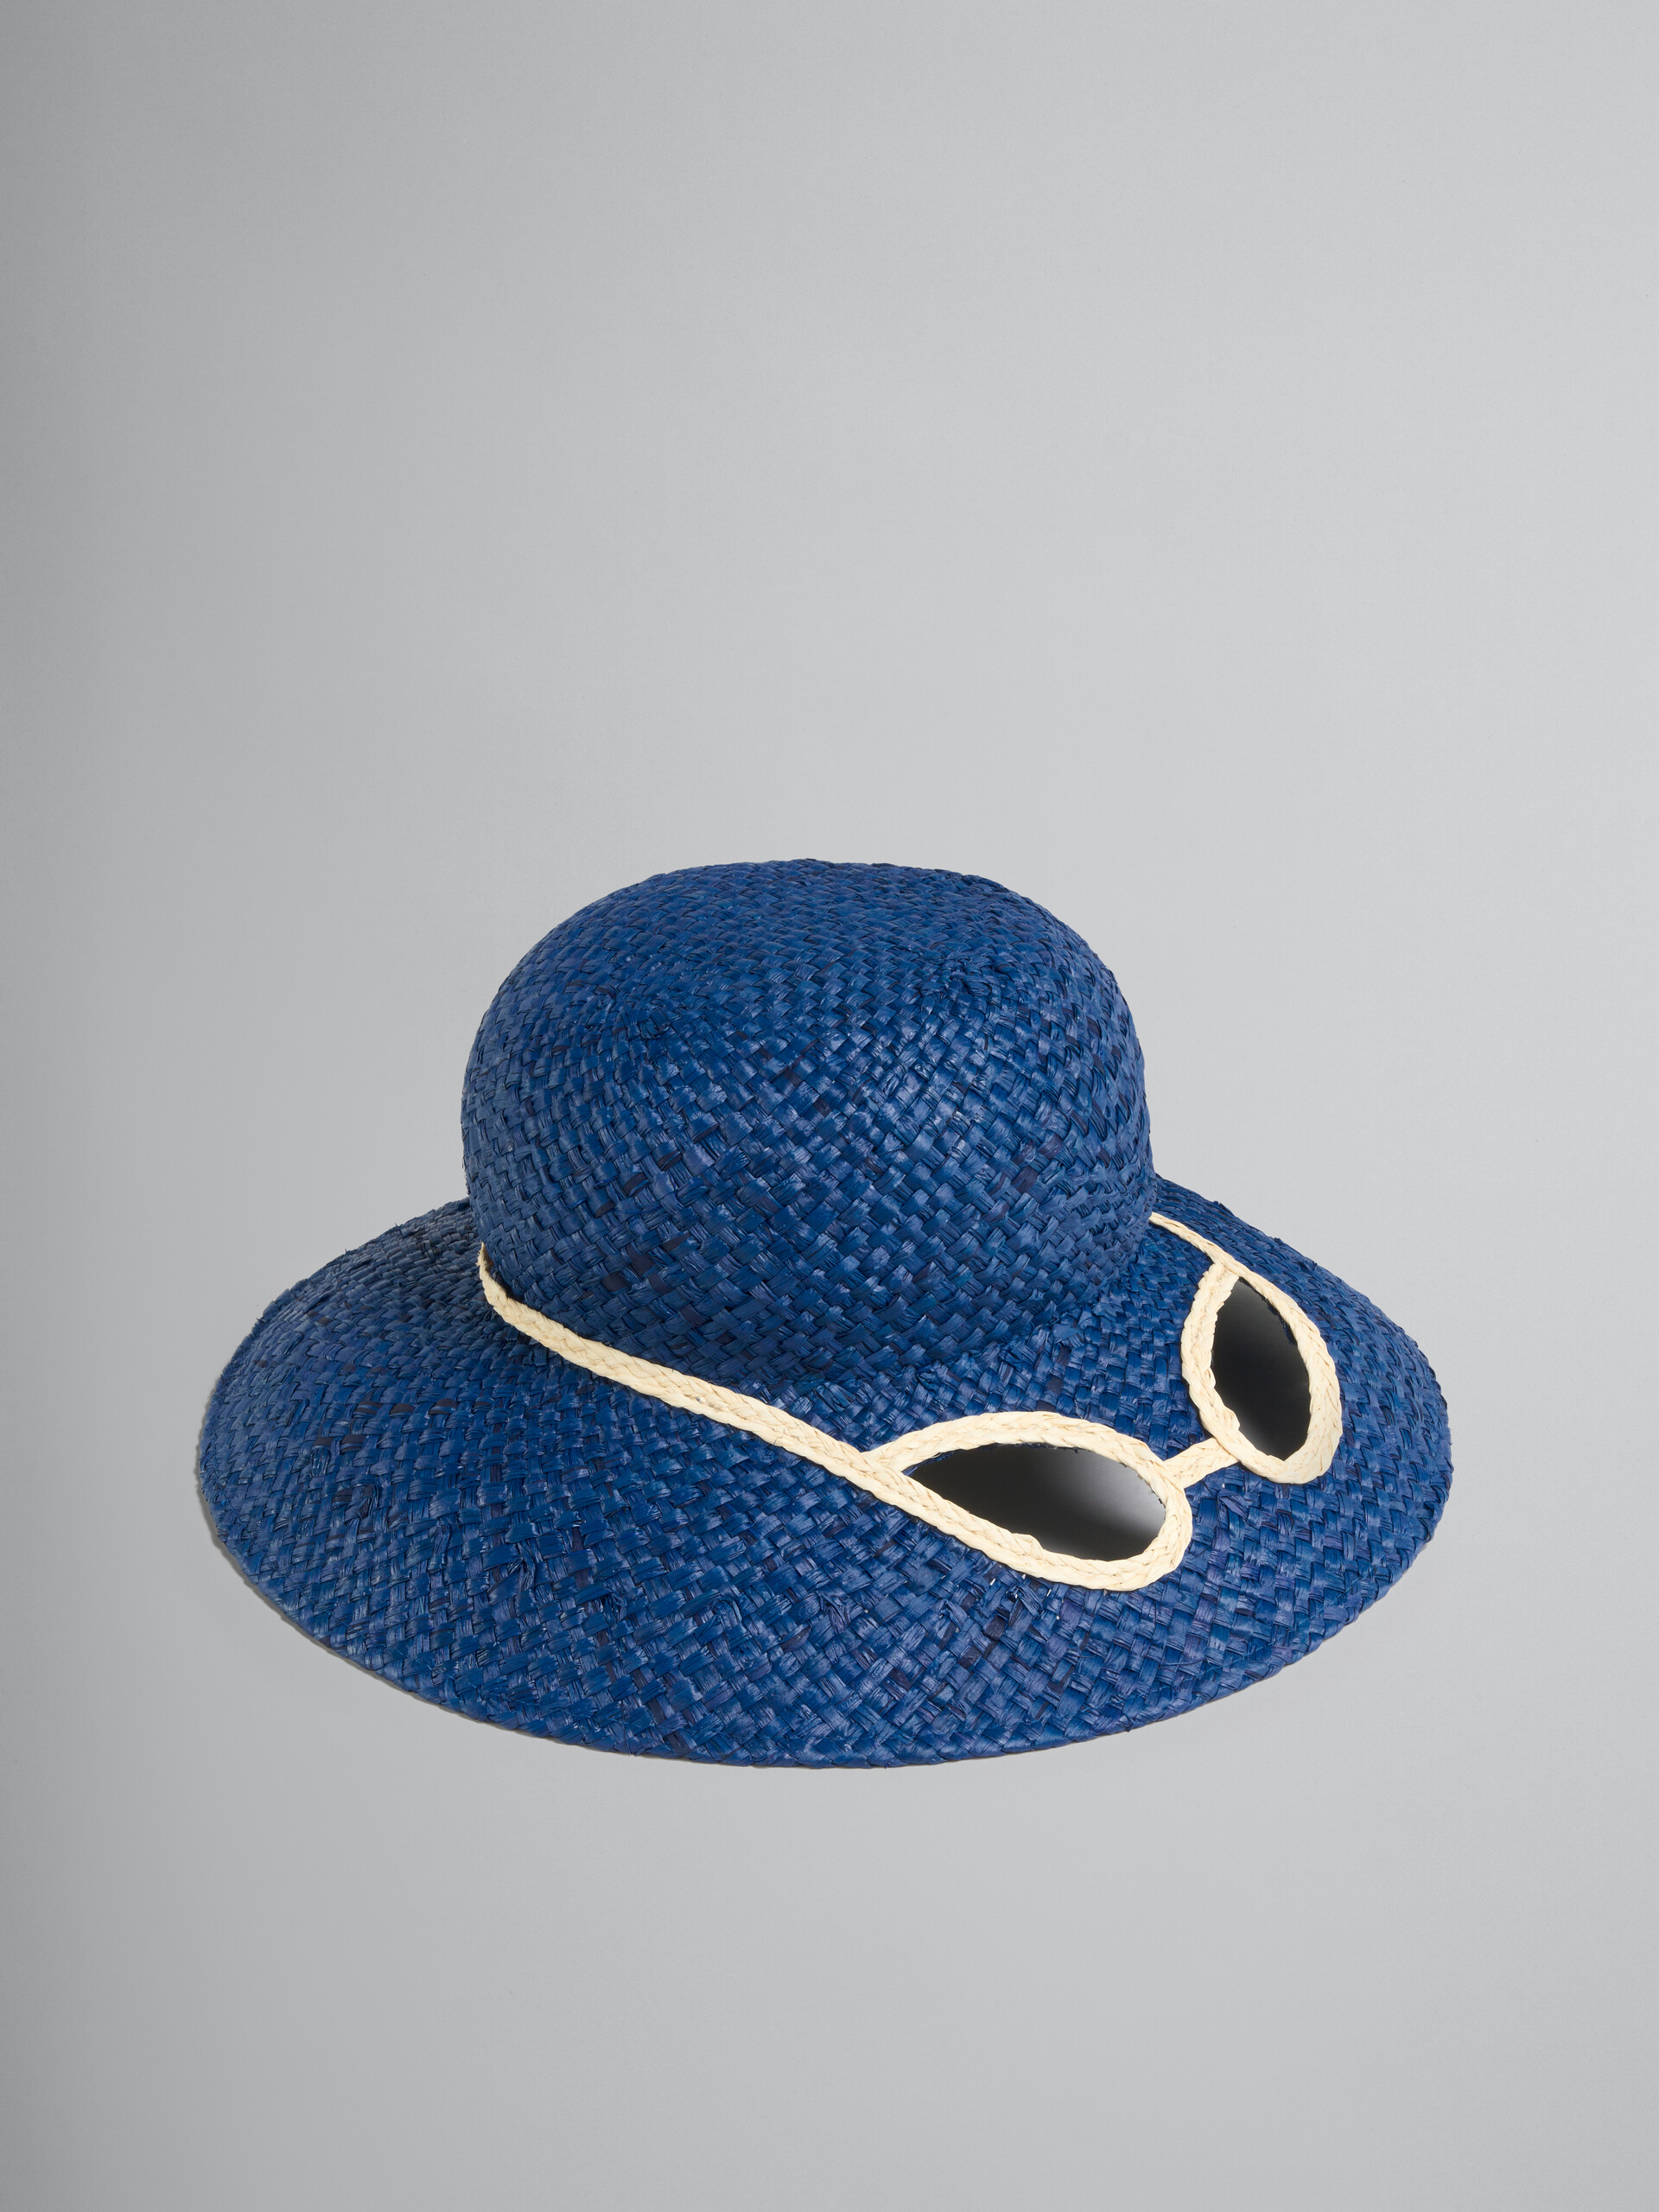 Marni x No Vacancy Inn - Blue hat in raffia with cut-outs - Hats - Image 1